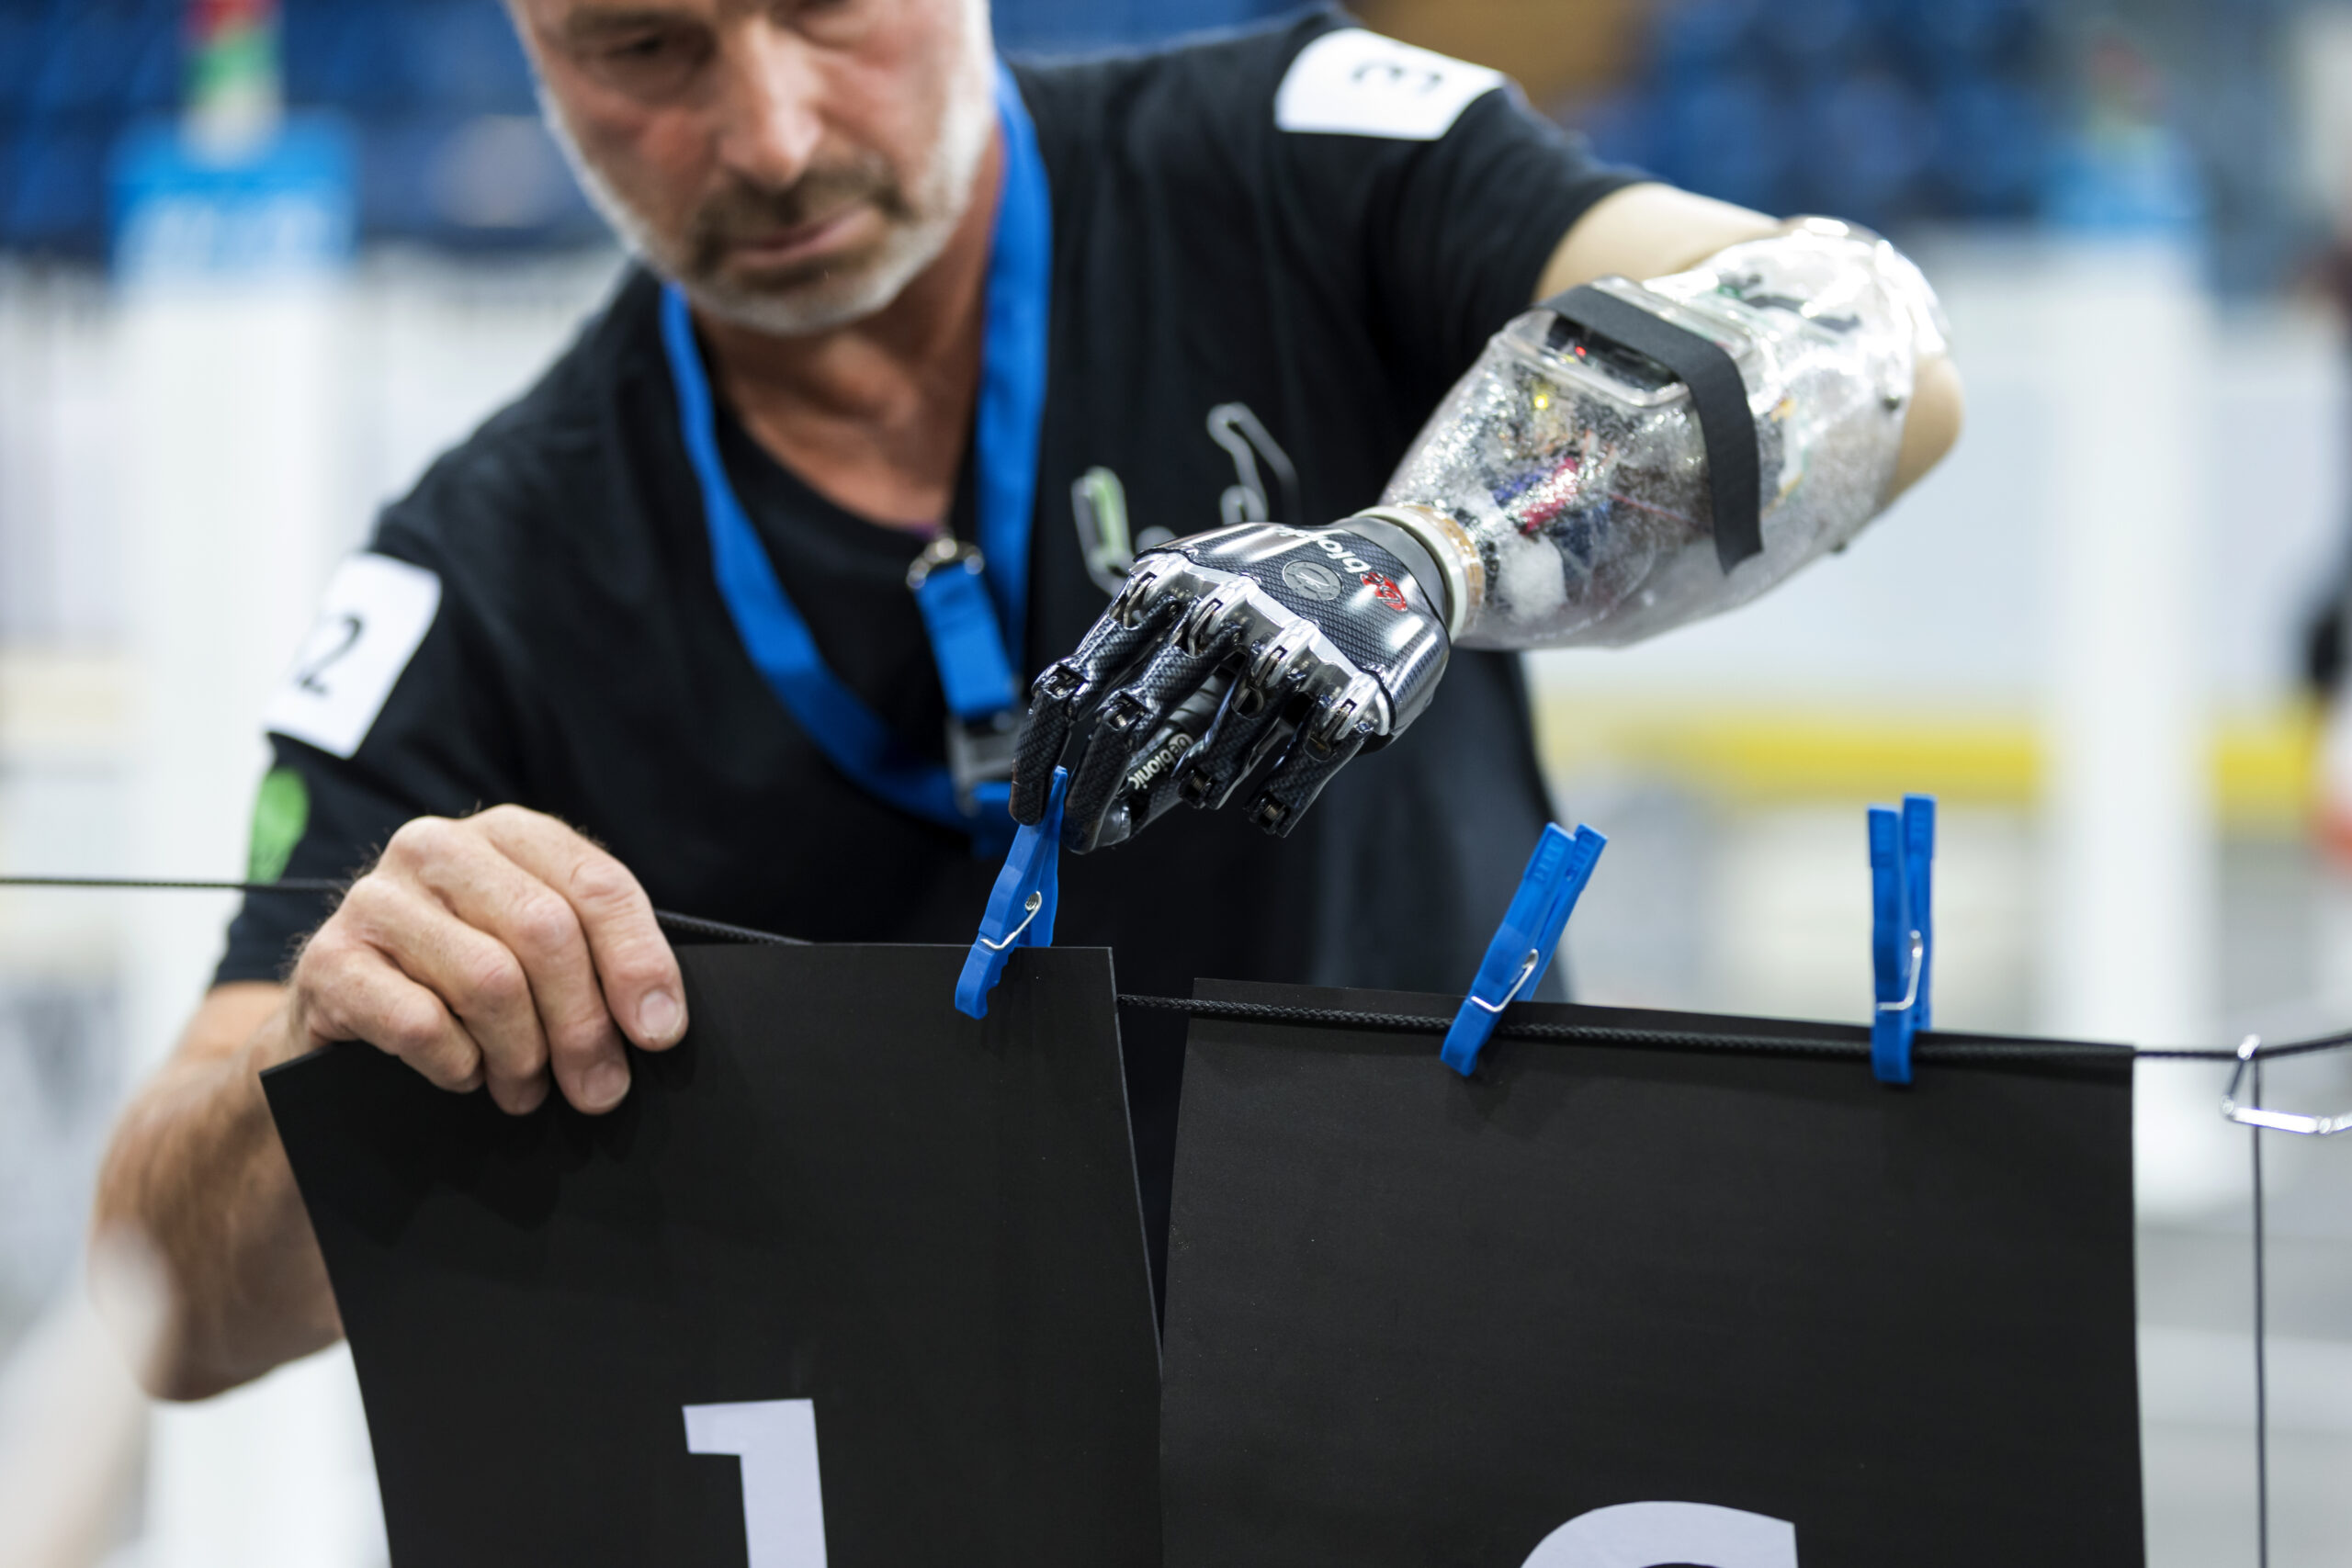 ‘Bionic Olympics’ Bring Cyborg Technology To Competition